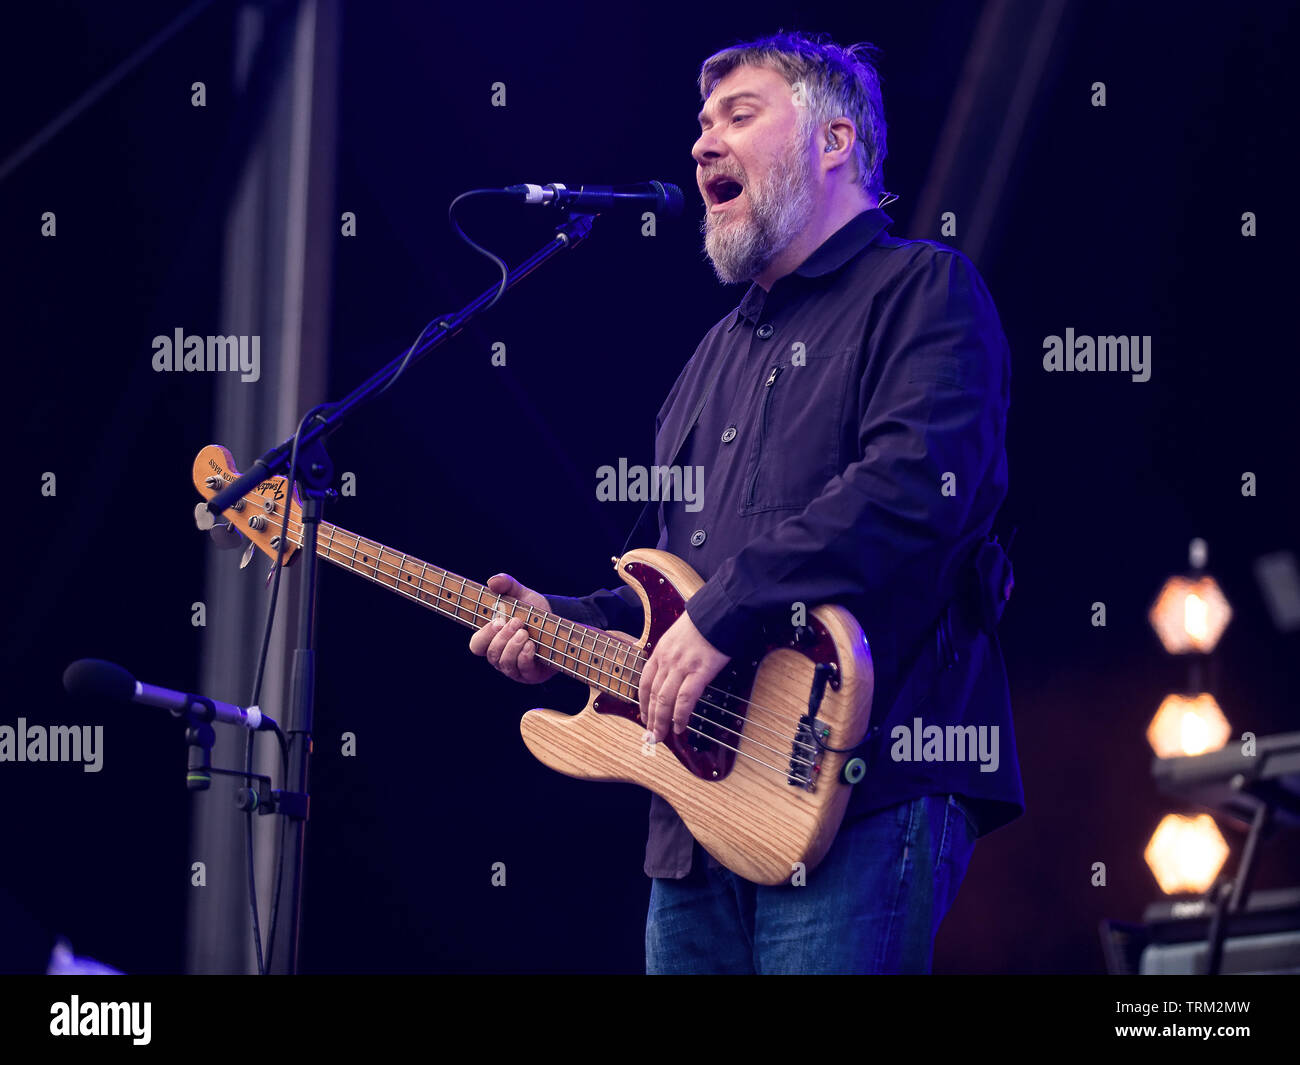 Glasgow, Scotland, UK. 8th June, 2019. Doves play live for the first time in 9 years in Glasgow, UK. Credit: Stuart Westwood Stock Photo